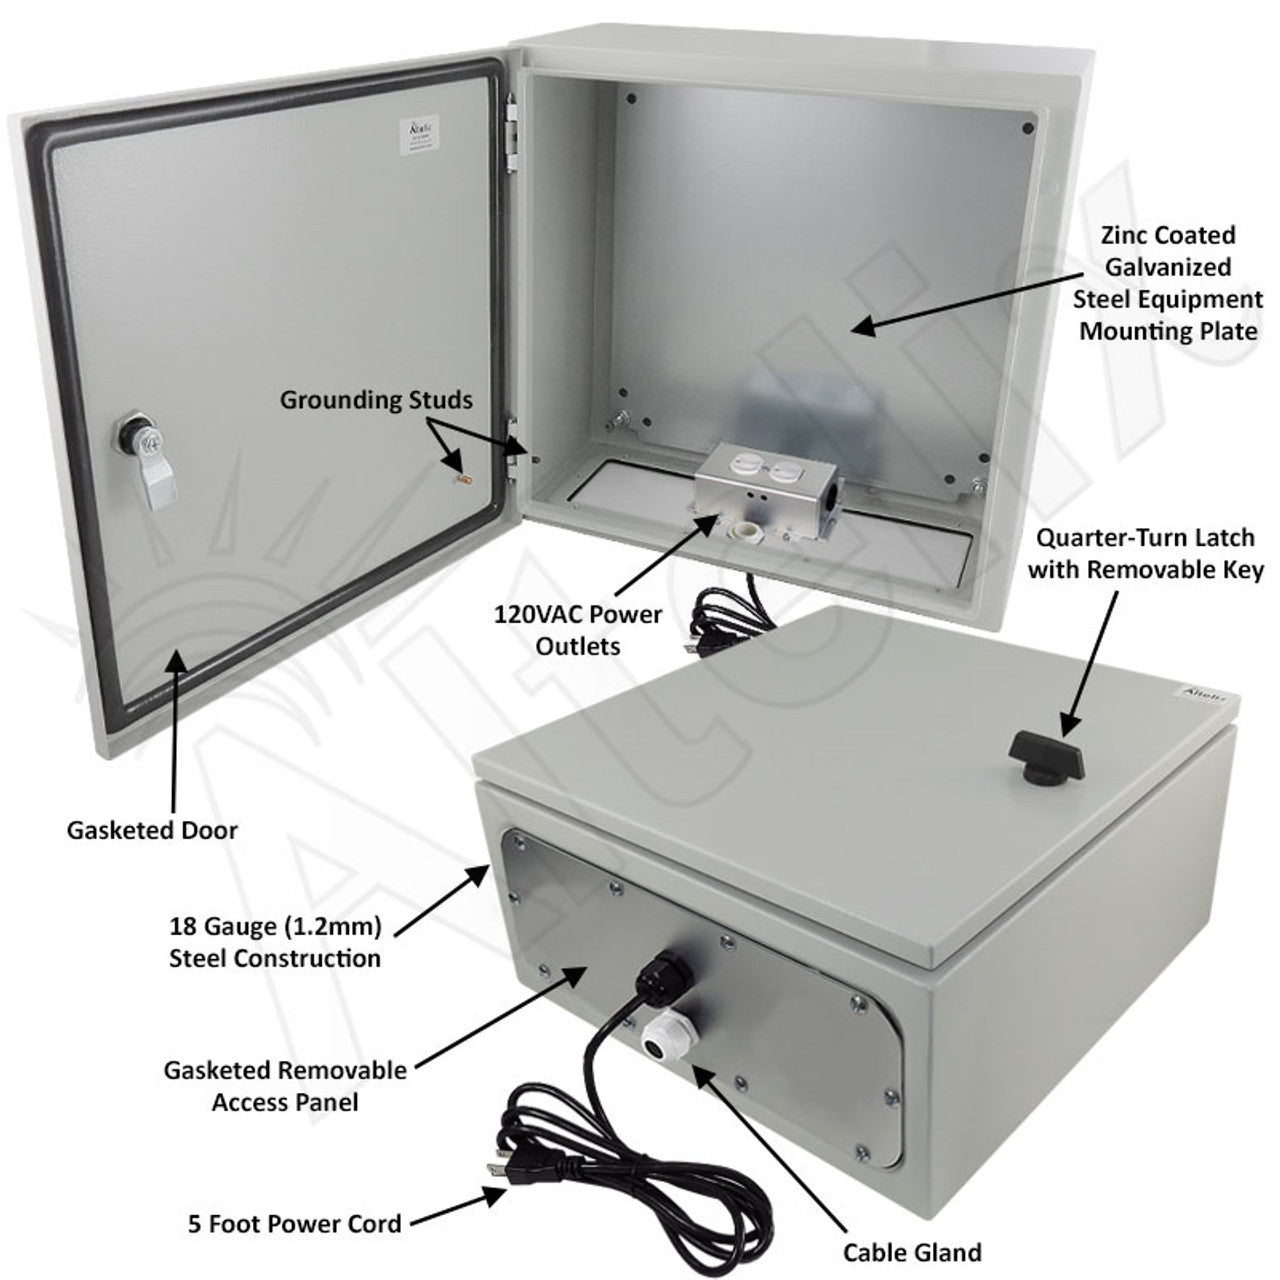 Altelix NEMA 4X Steel Weatherproof Enclosure with 120 VAC Outlets and Power Cord - 0